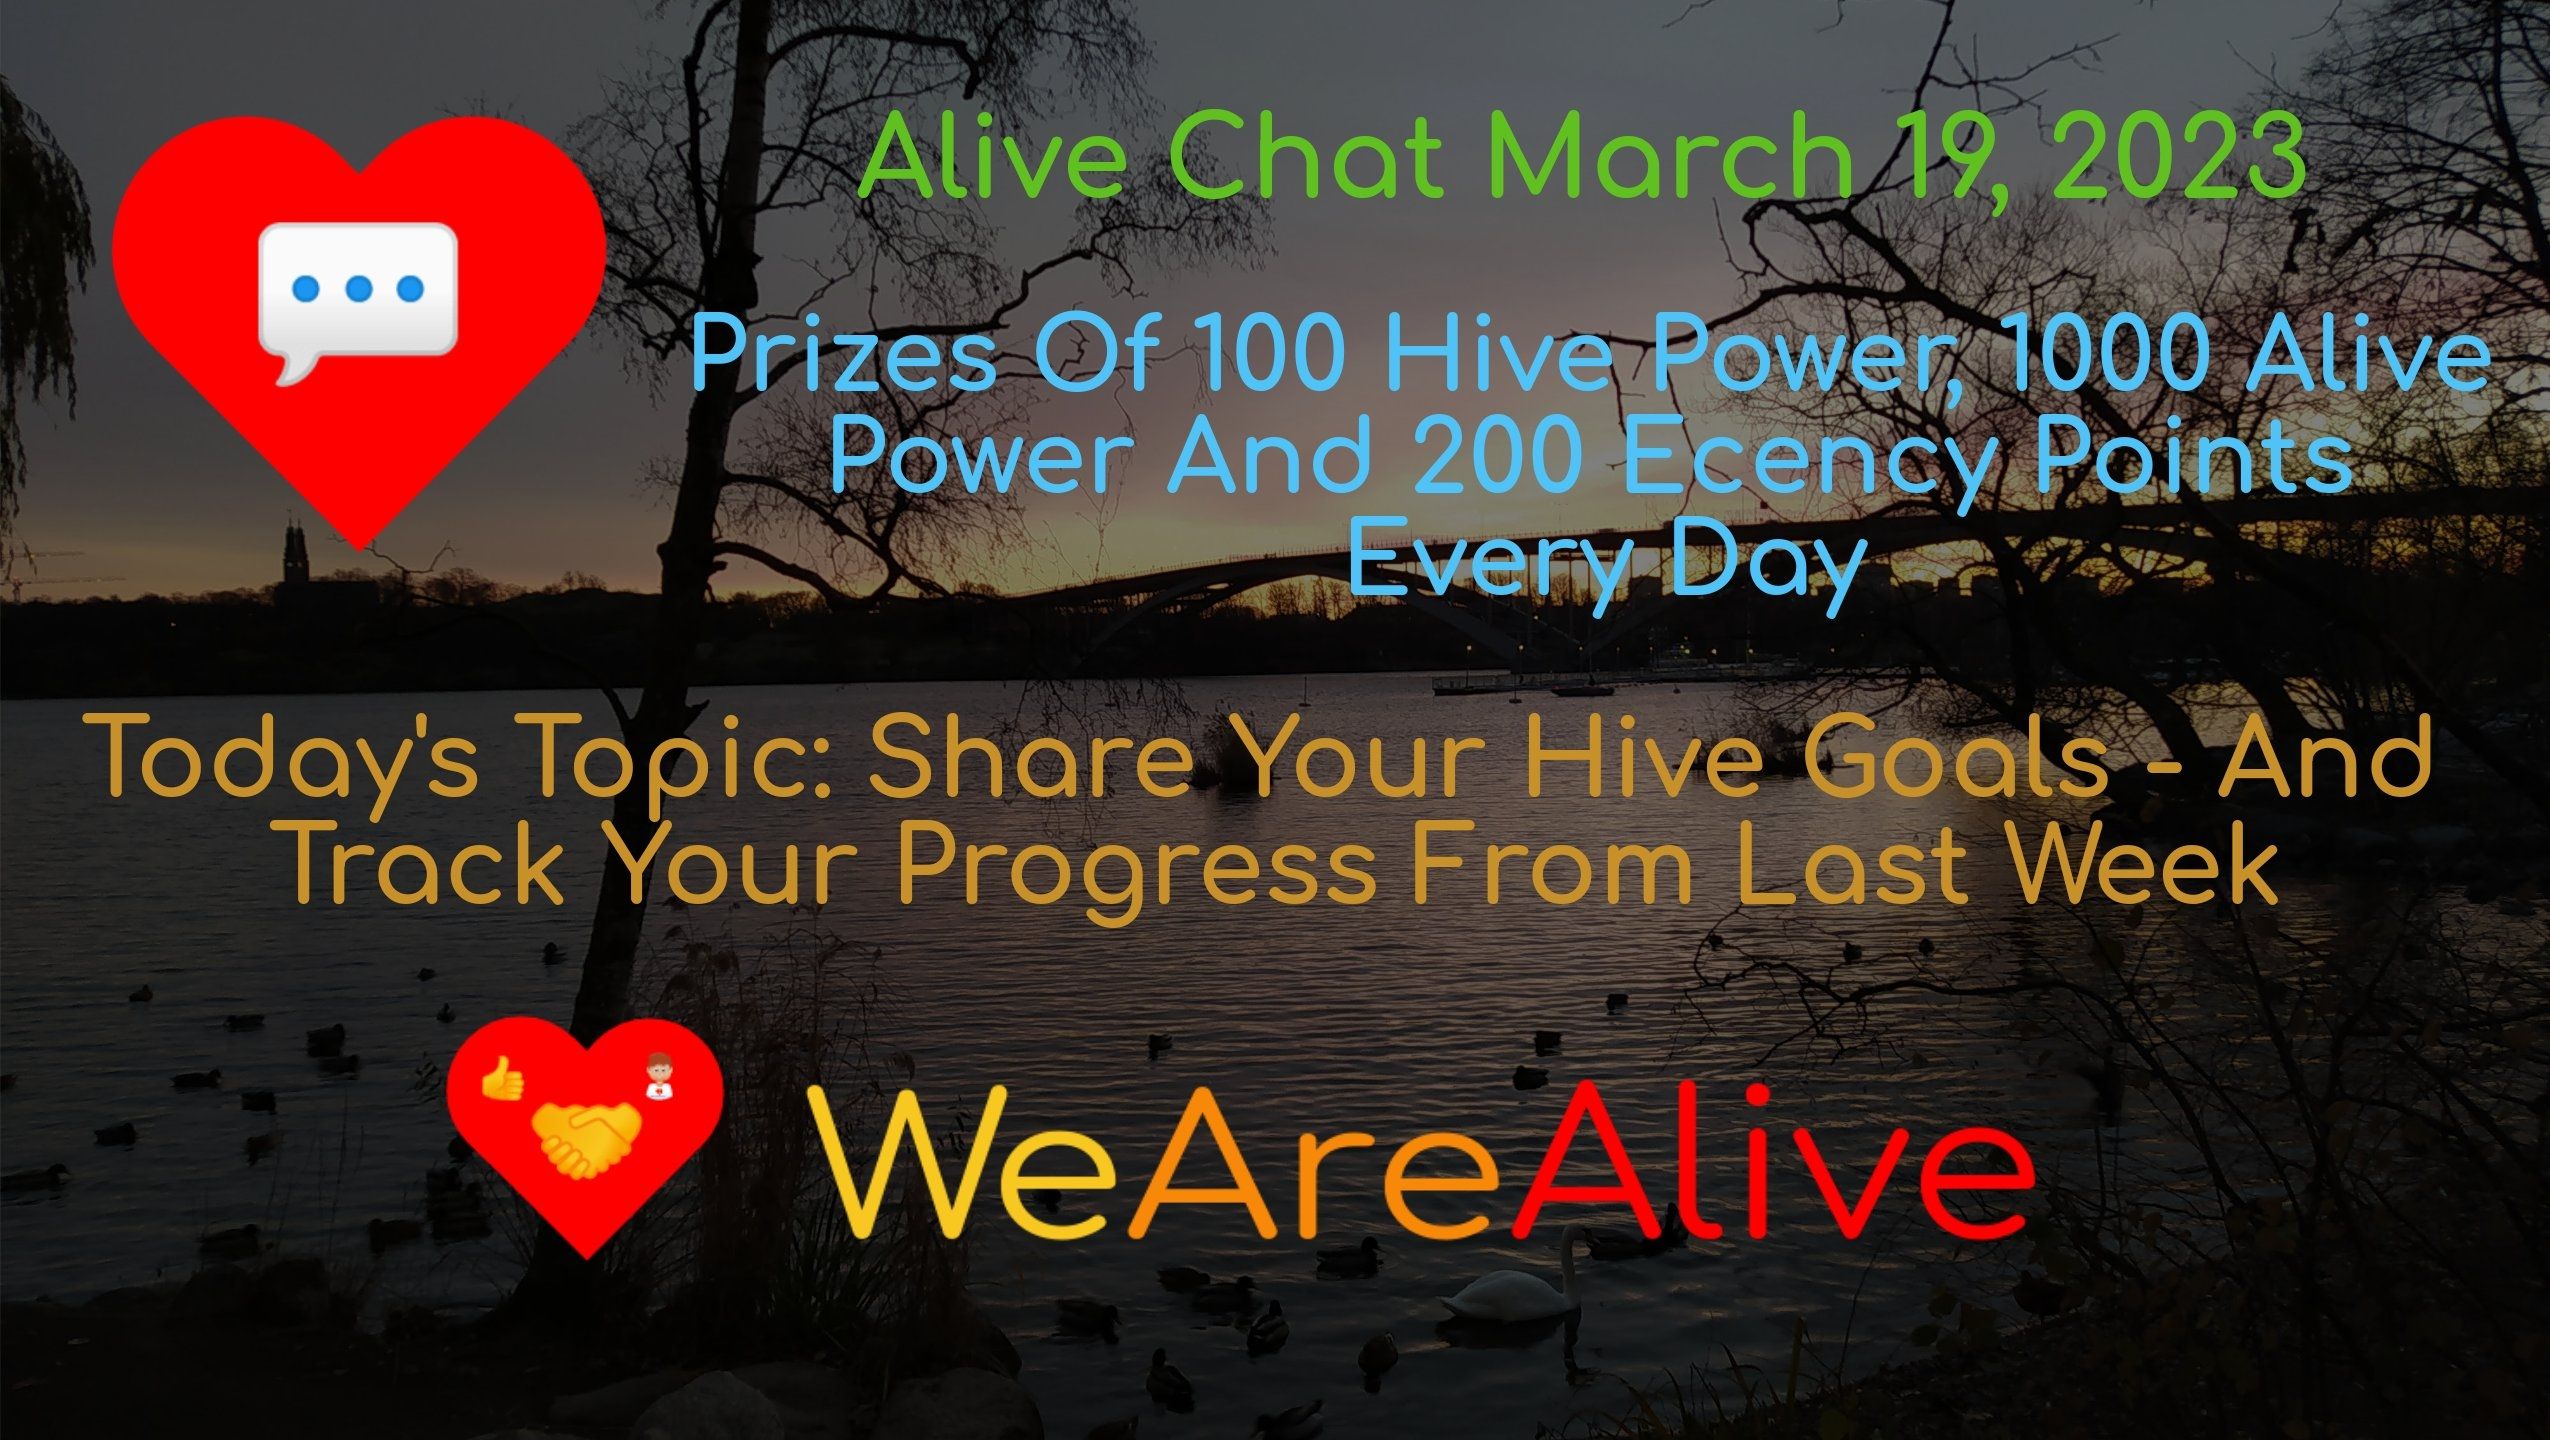 @alive.chat/alive-chat-march-19-2023